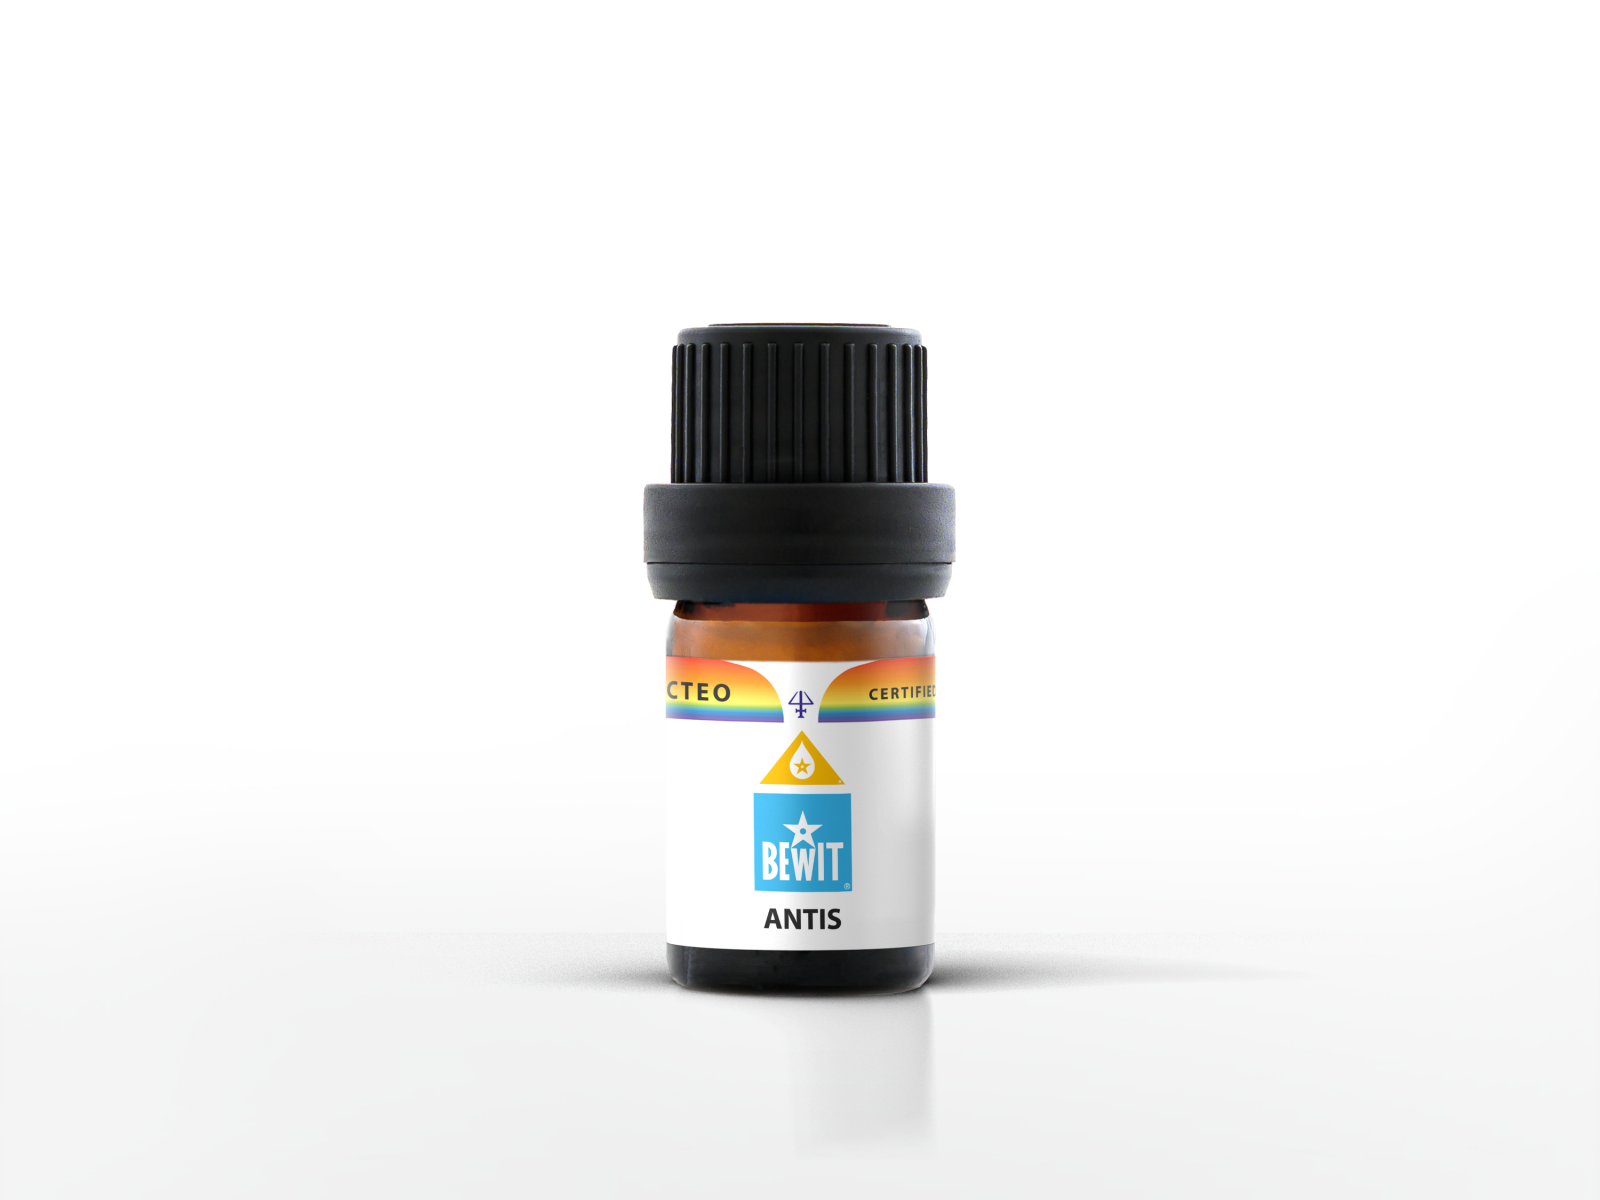 BEWIT ANTIS - This is a blend of the essential oils - 2